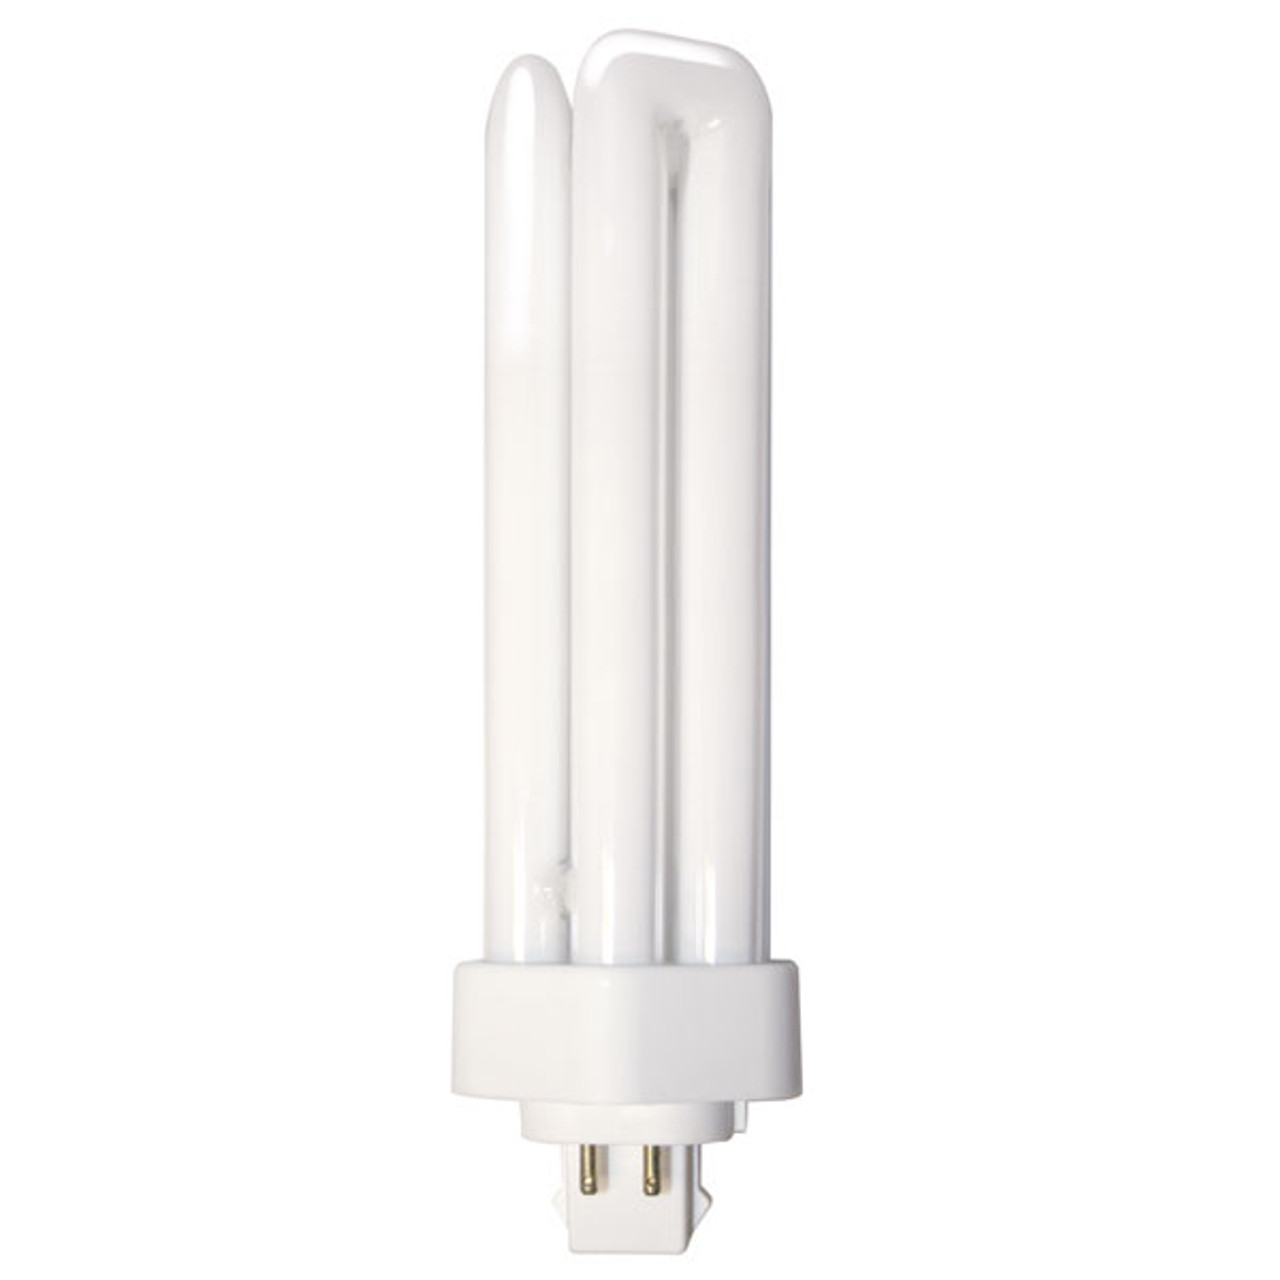 BELL 26W 2-Pin 840 Cool White